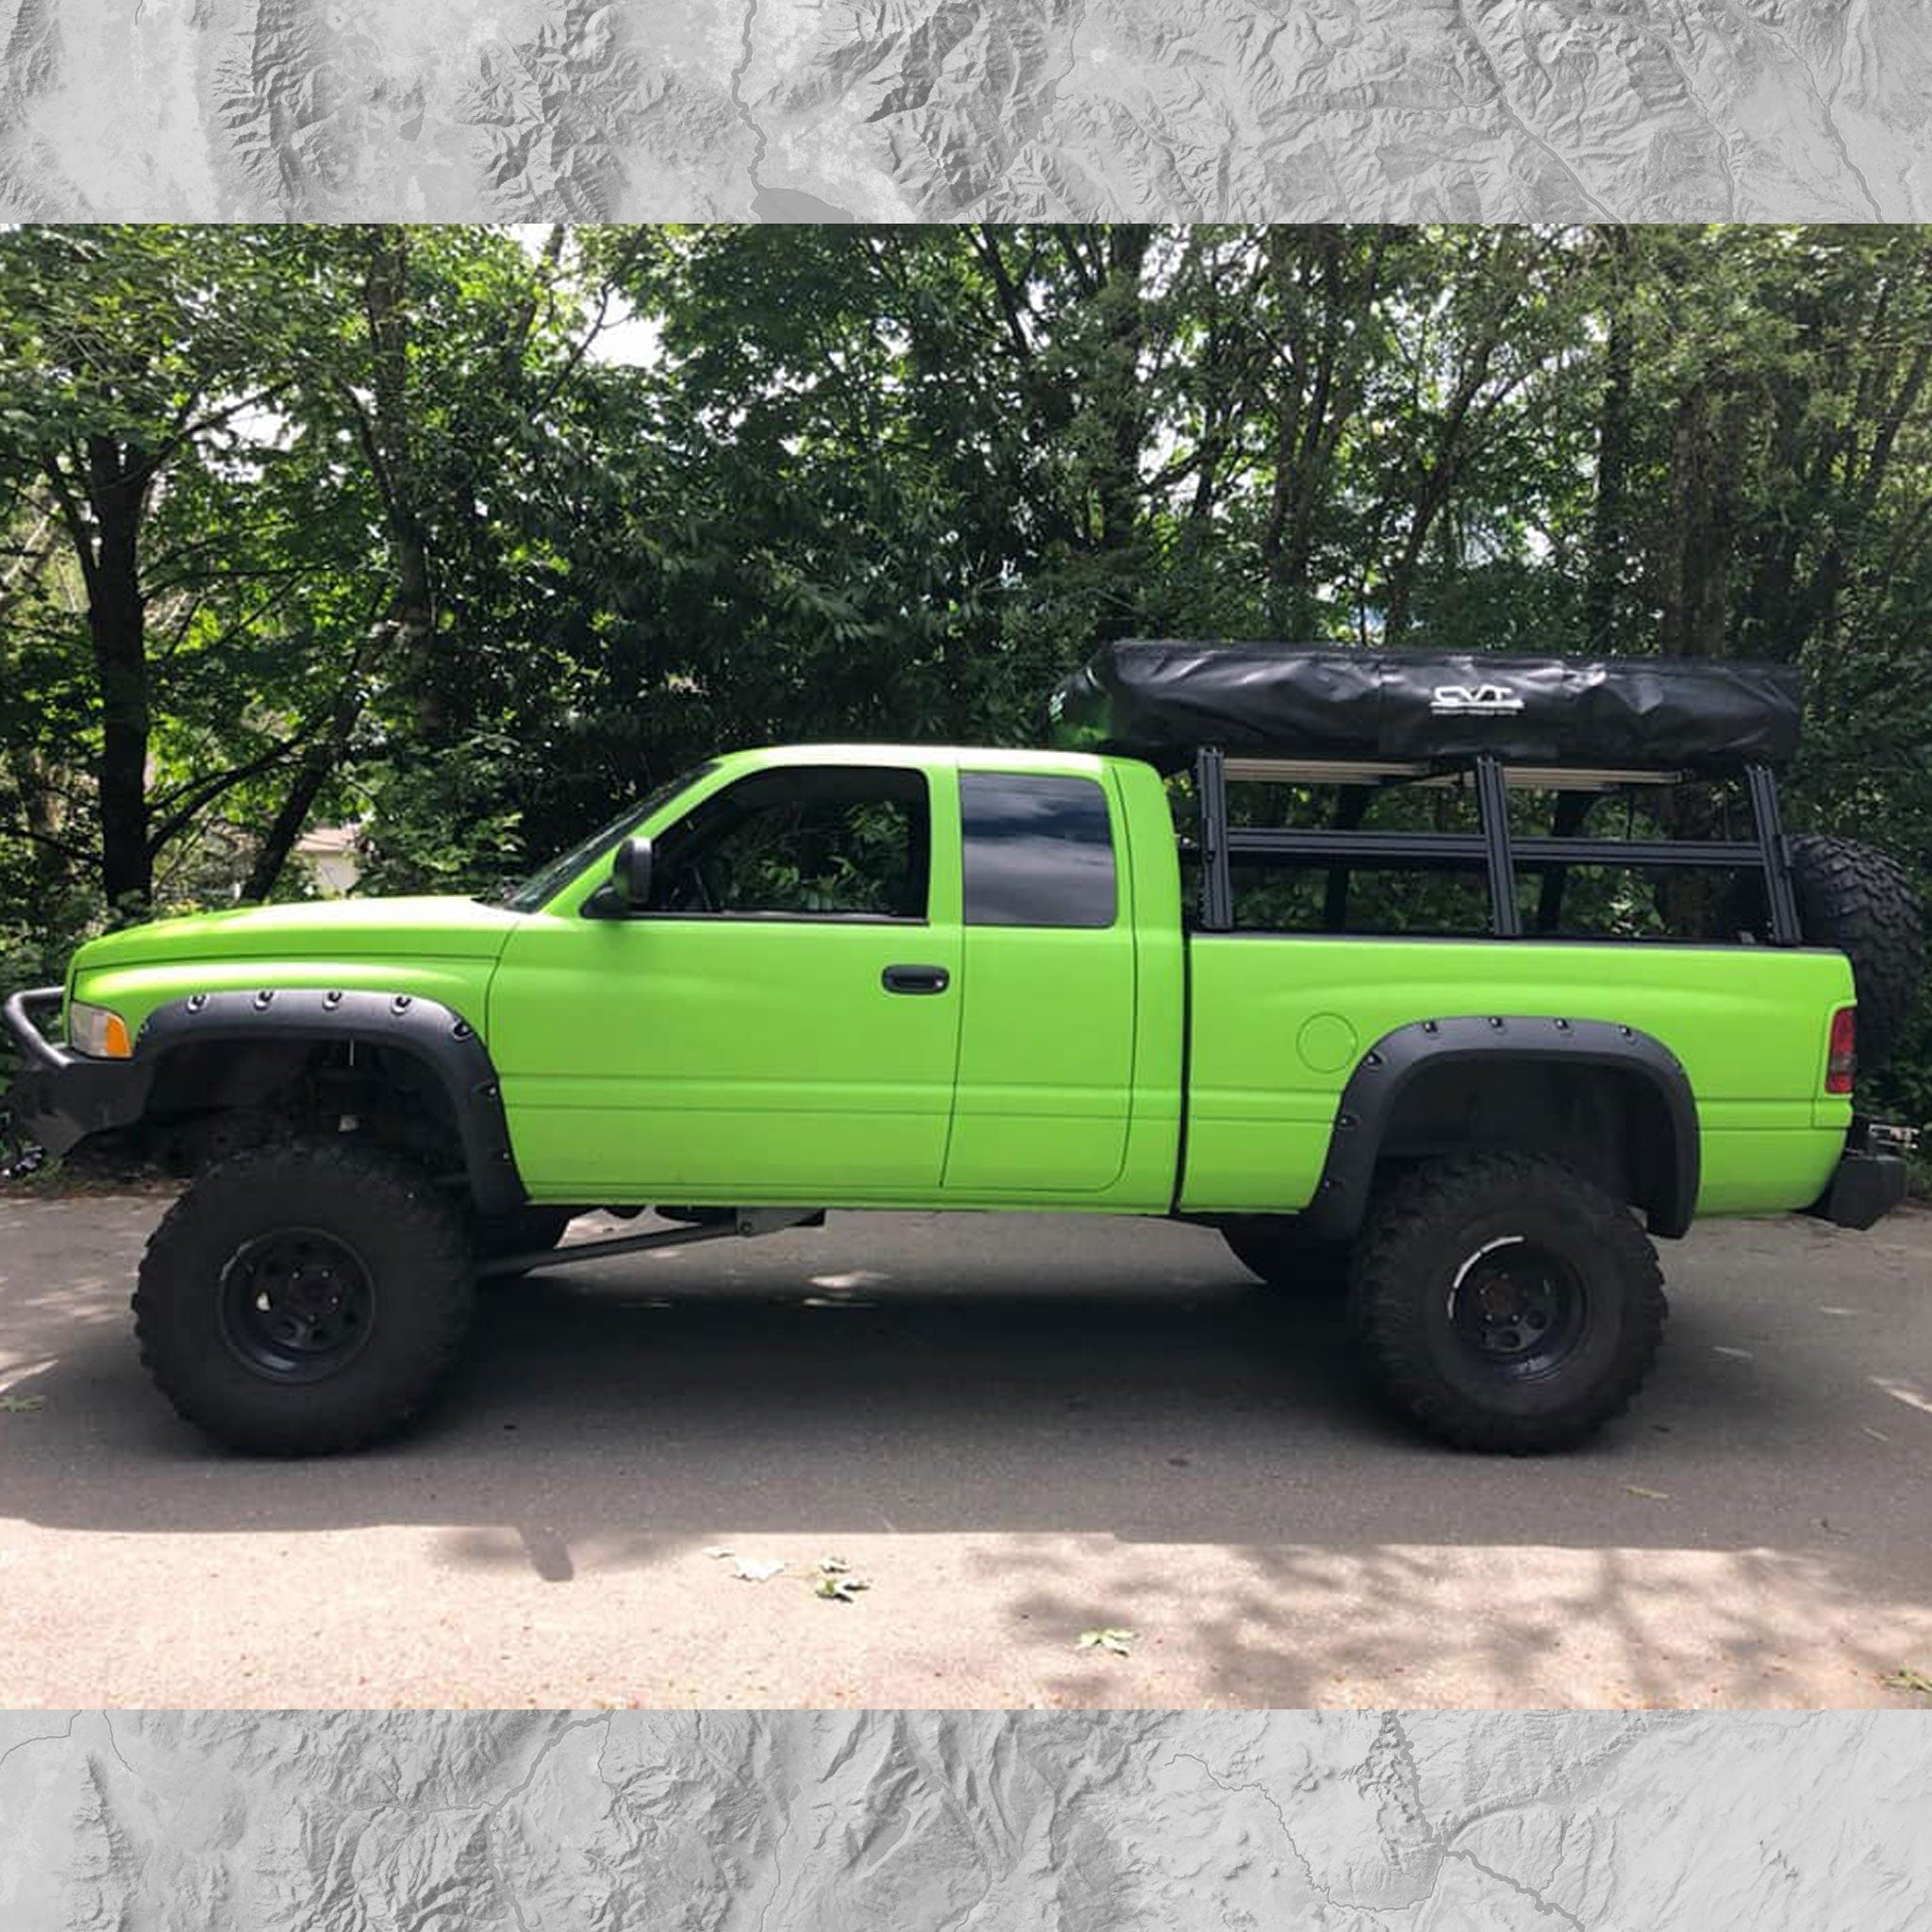 Dodge Ram with XRT3 bed rack and closed roof top tent